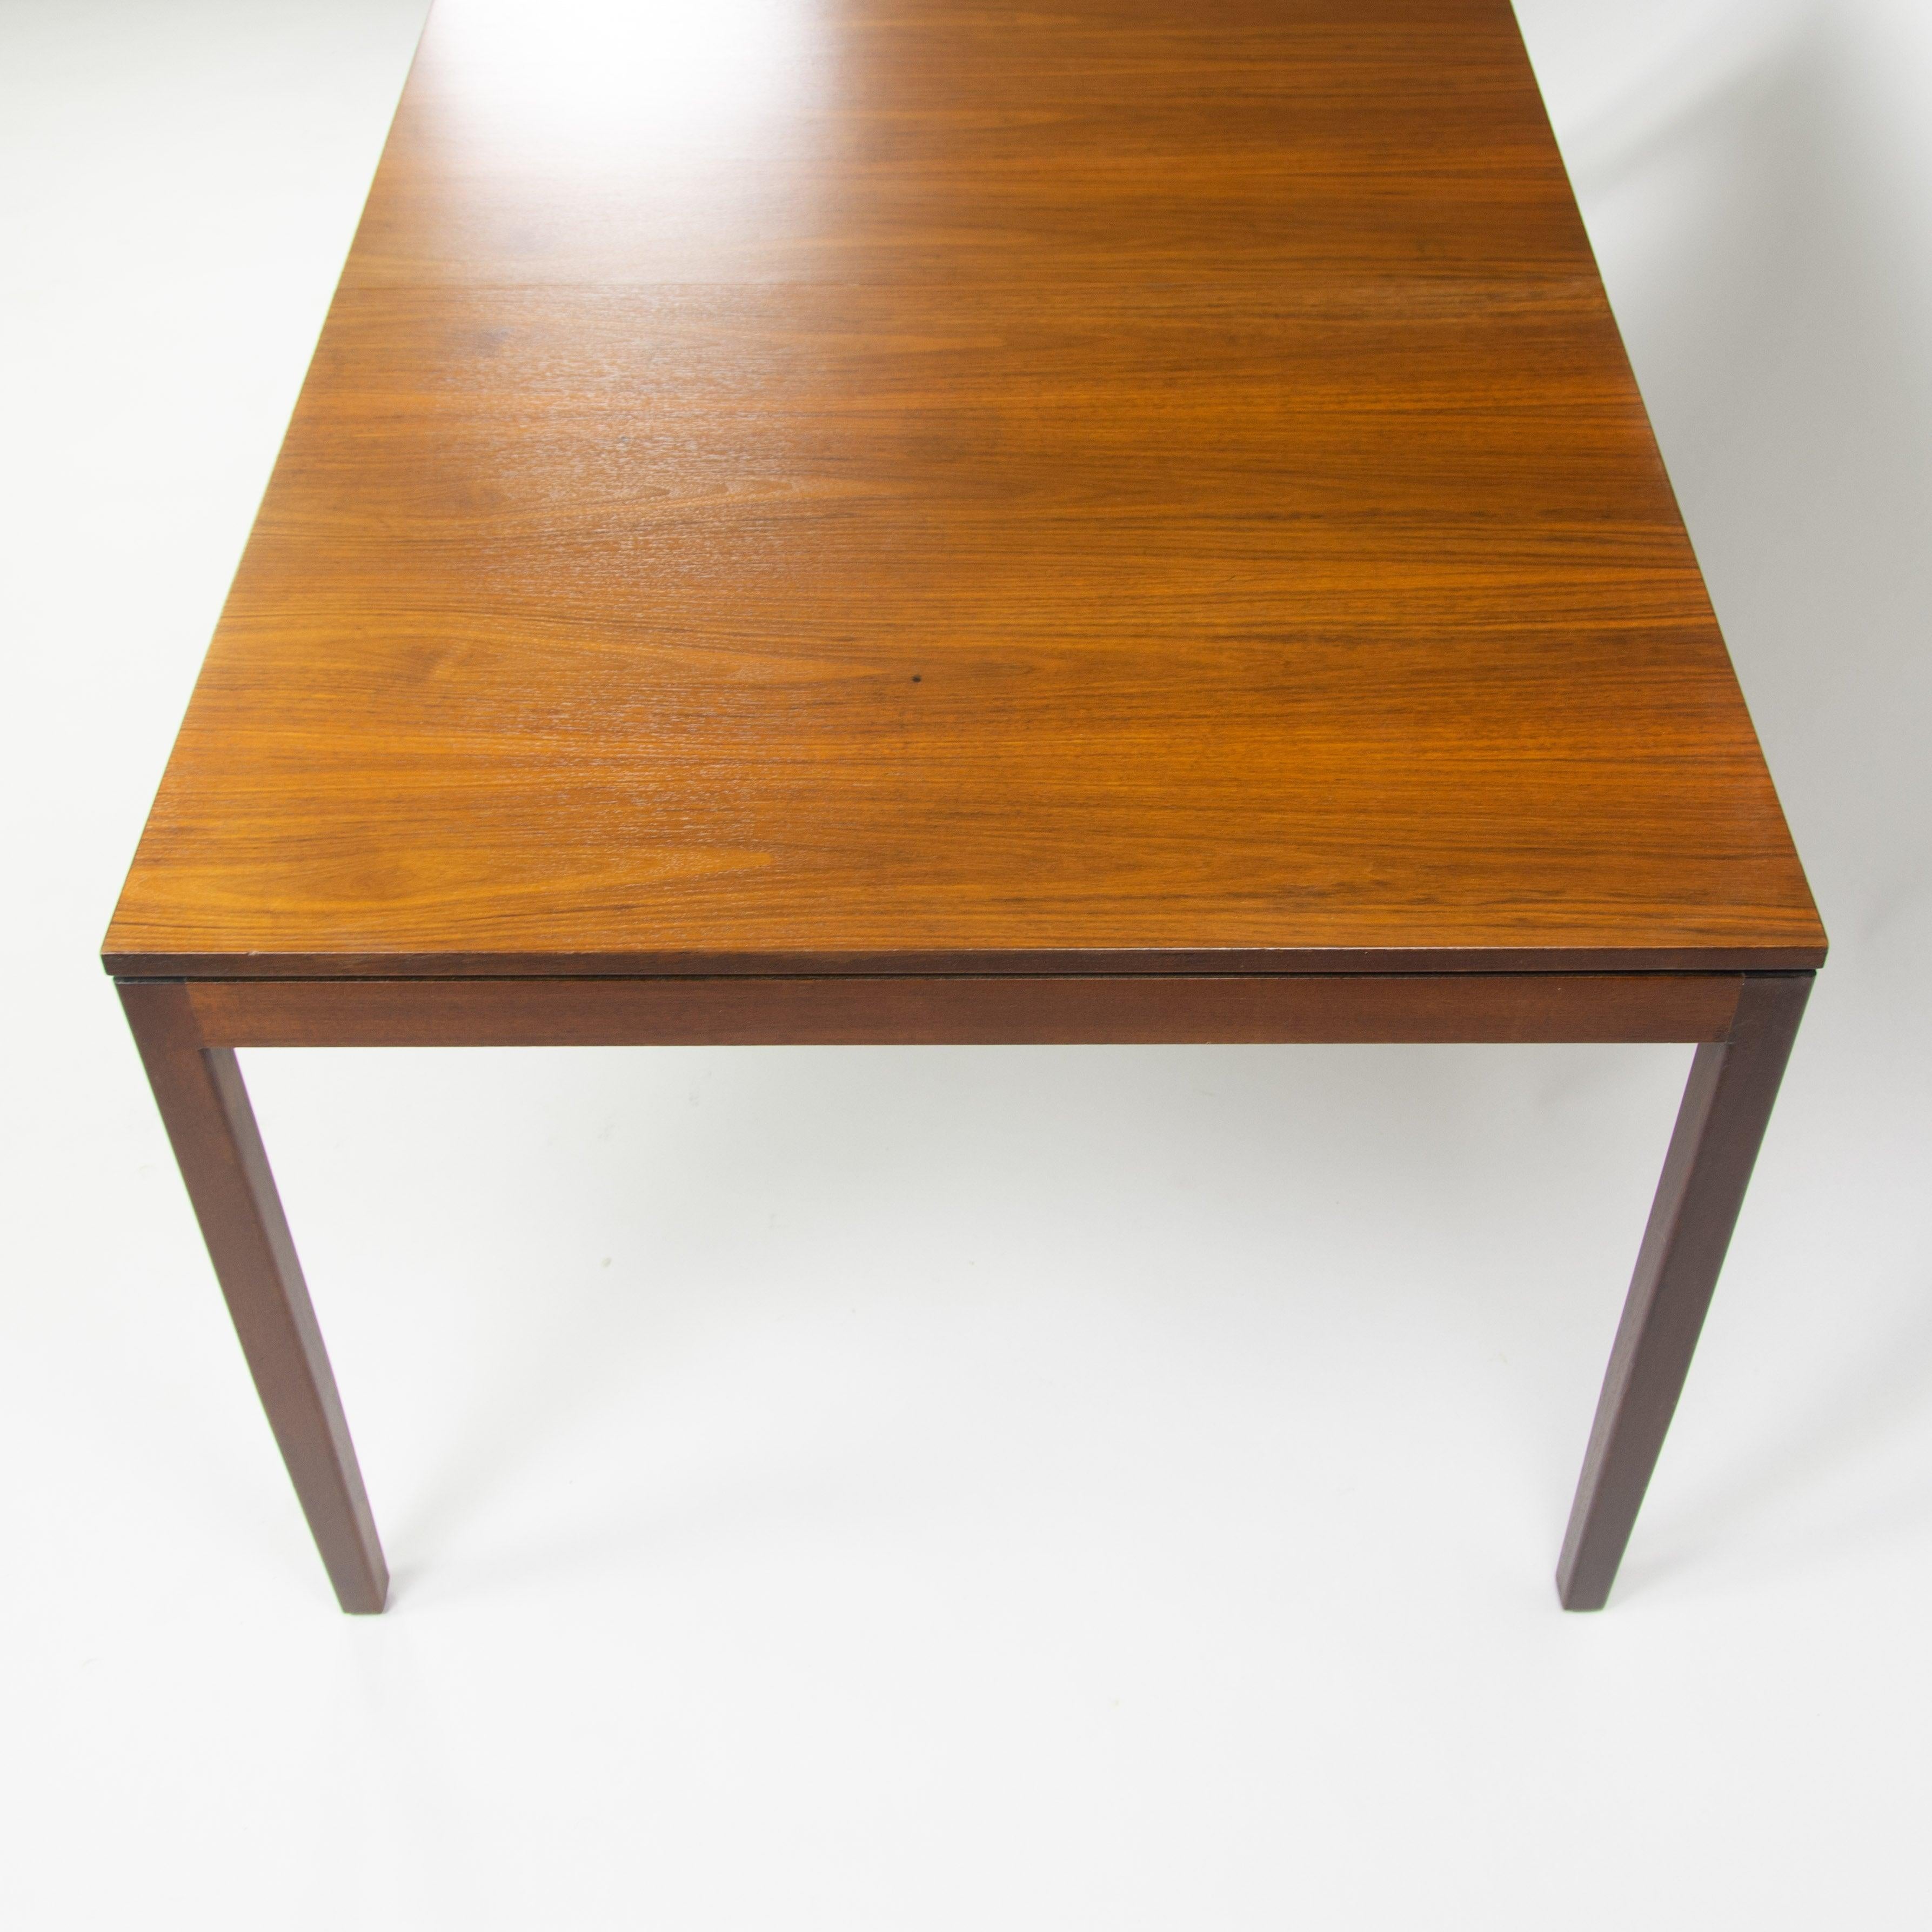 1950's Rare Original Florence Knoll Walnut Dining Table w/ Leaf 56-84 inches For Sale 4